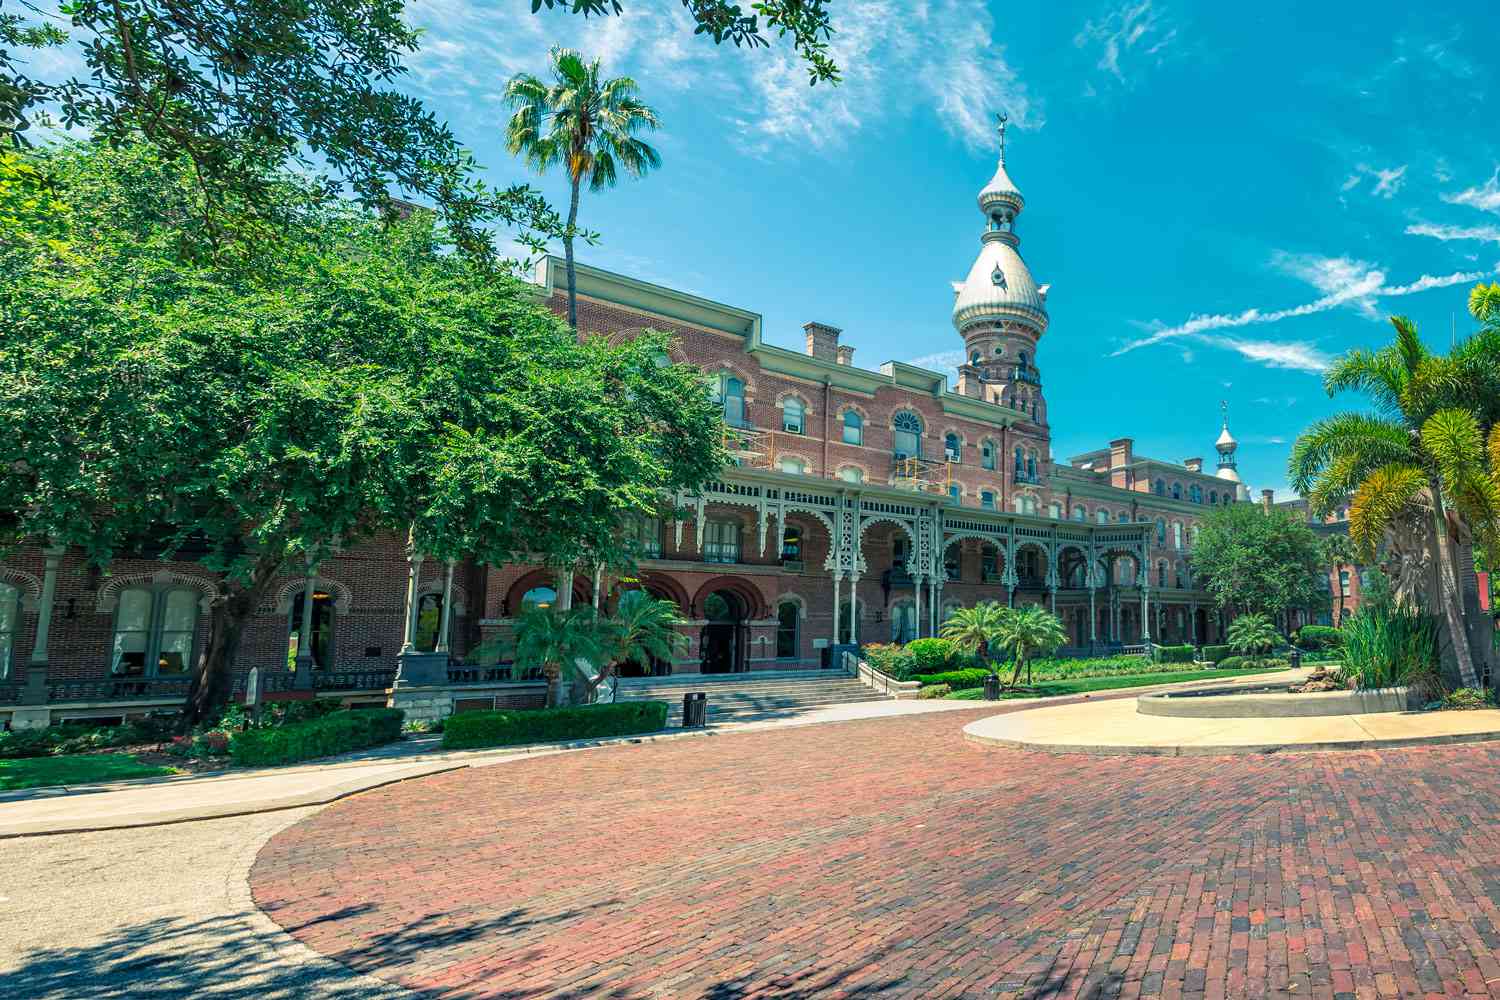  Abandoned Baby Found Dead on University of Tampa Campus 